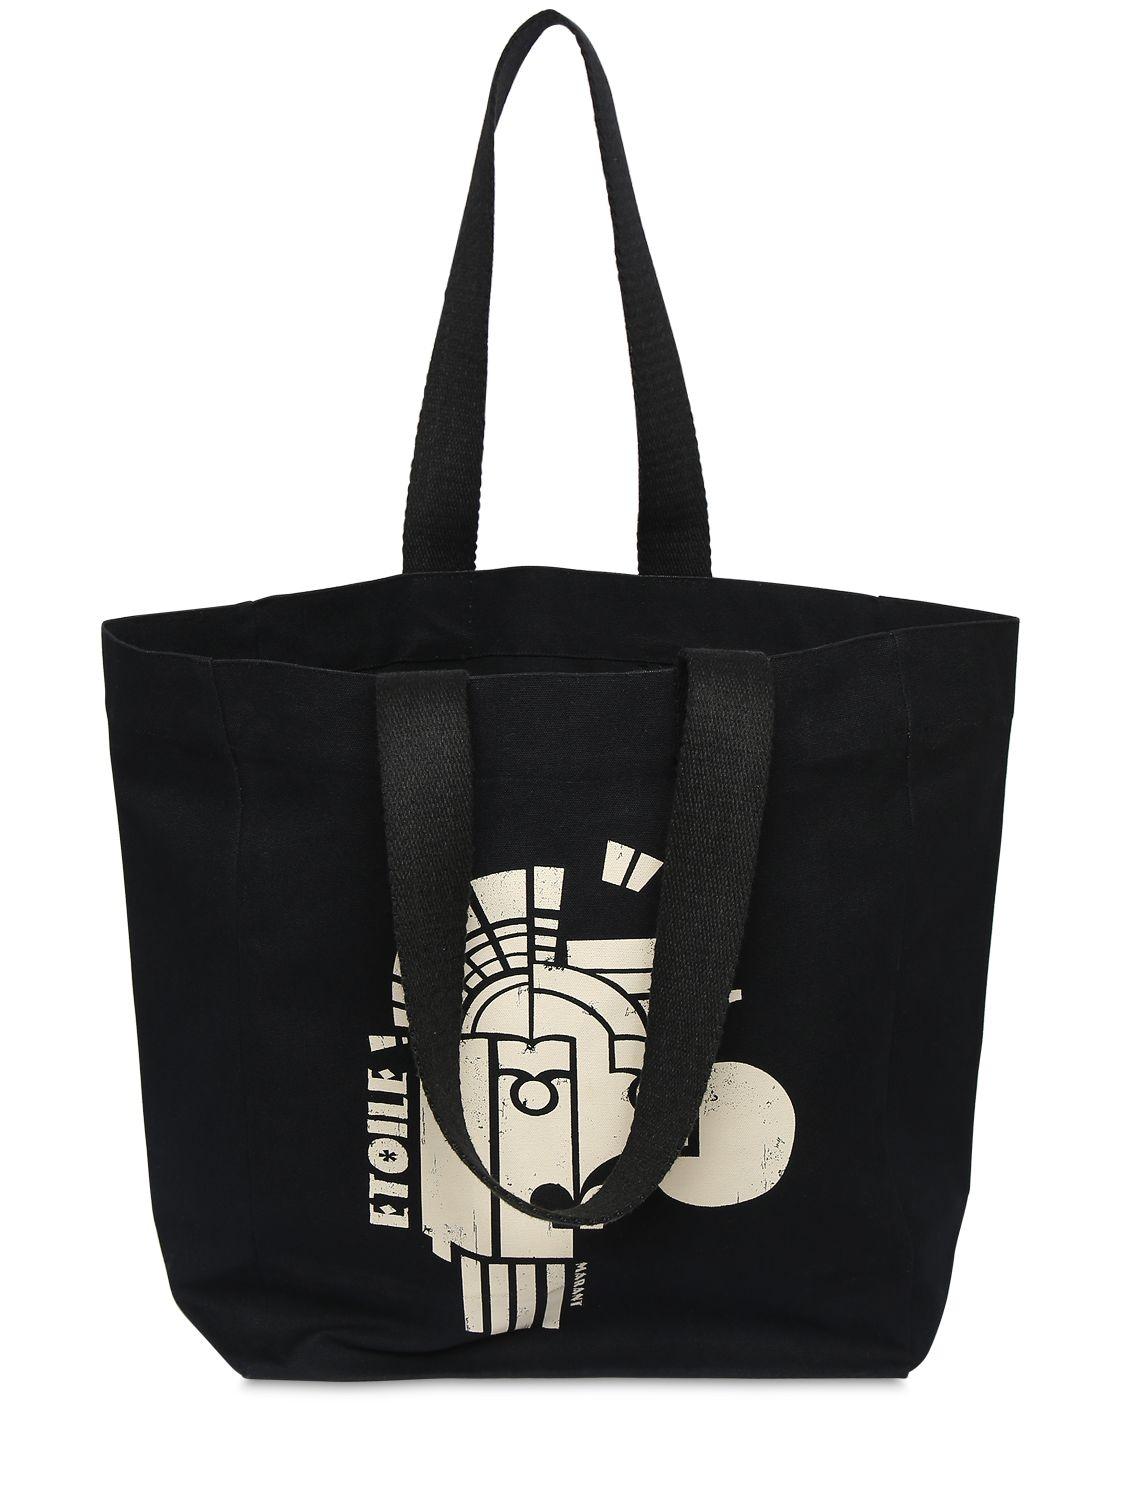 Isabel Marant Printed Cotton Tote Bag in Black - Lyst